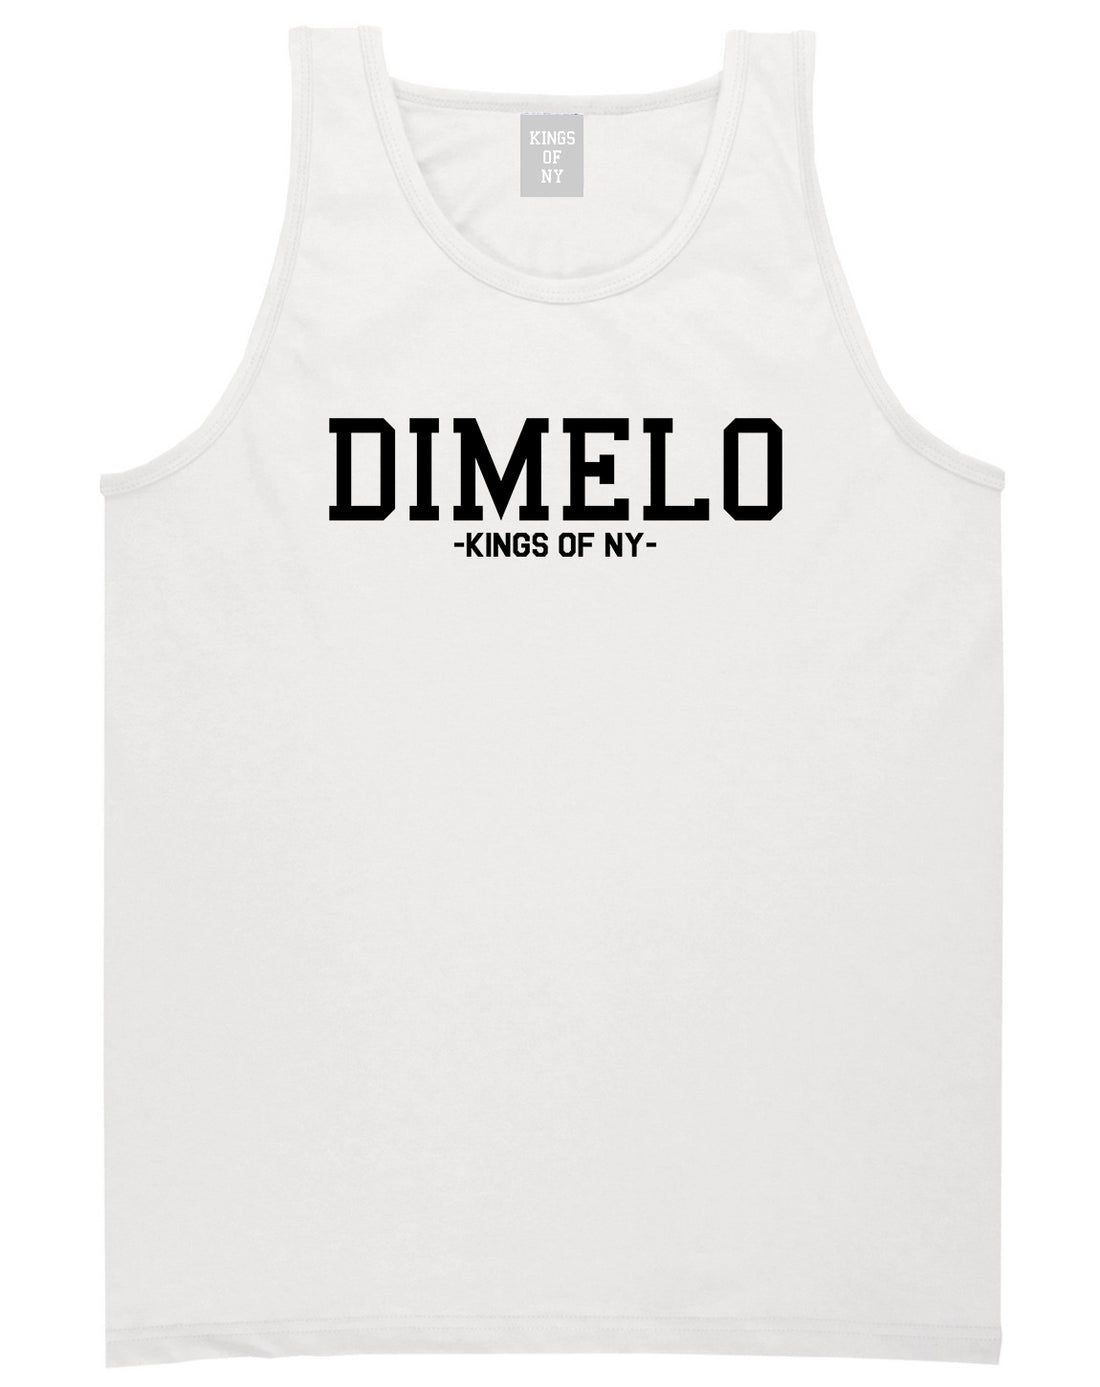 Dimelo Kings Of NY Tank Top Shirt in White